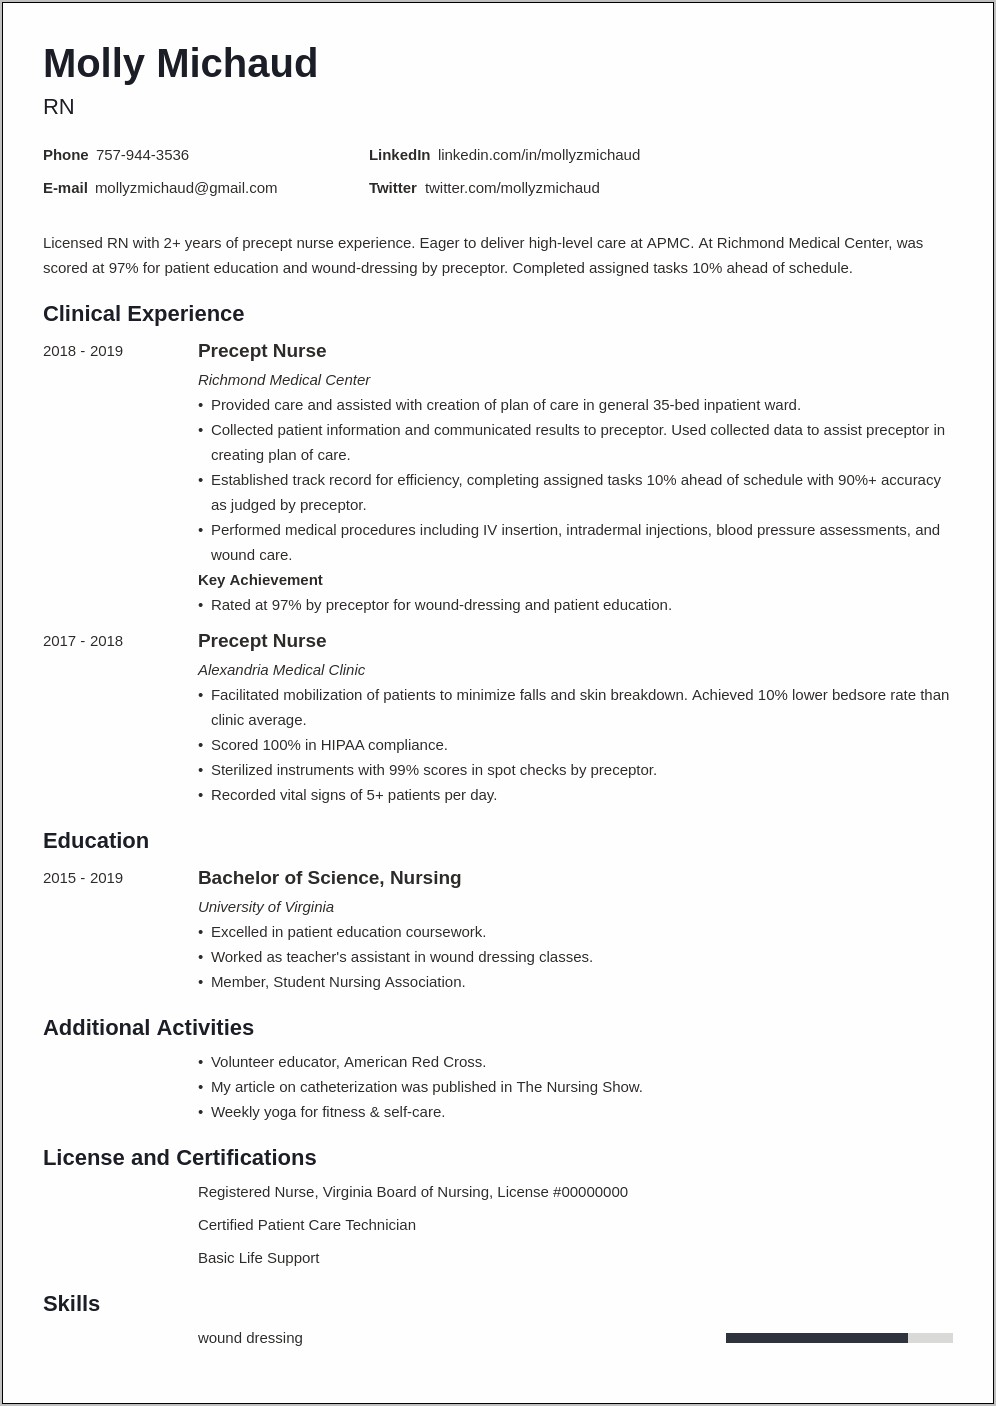 rn-resume-sample-med-surg-certification-questions-resume-example-gallery